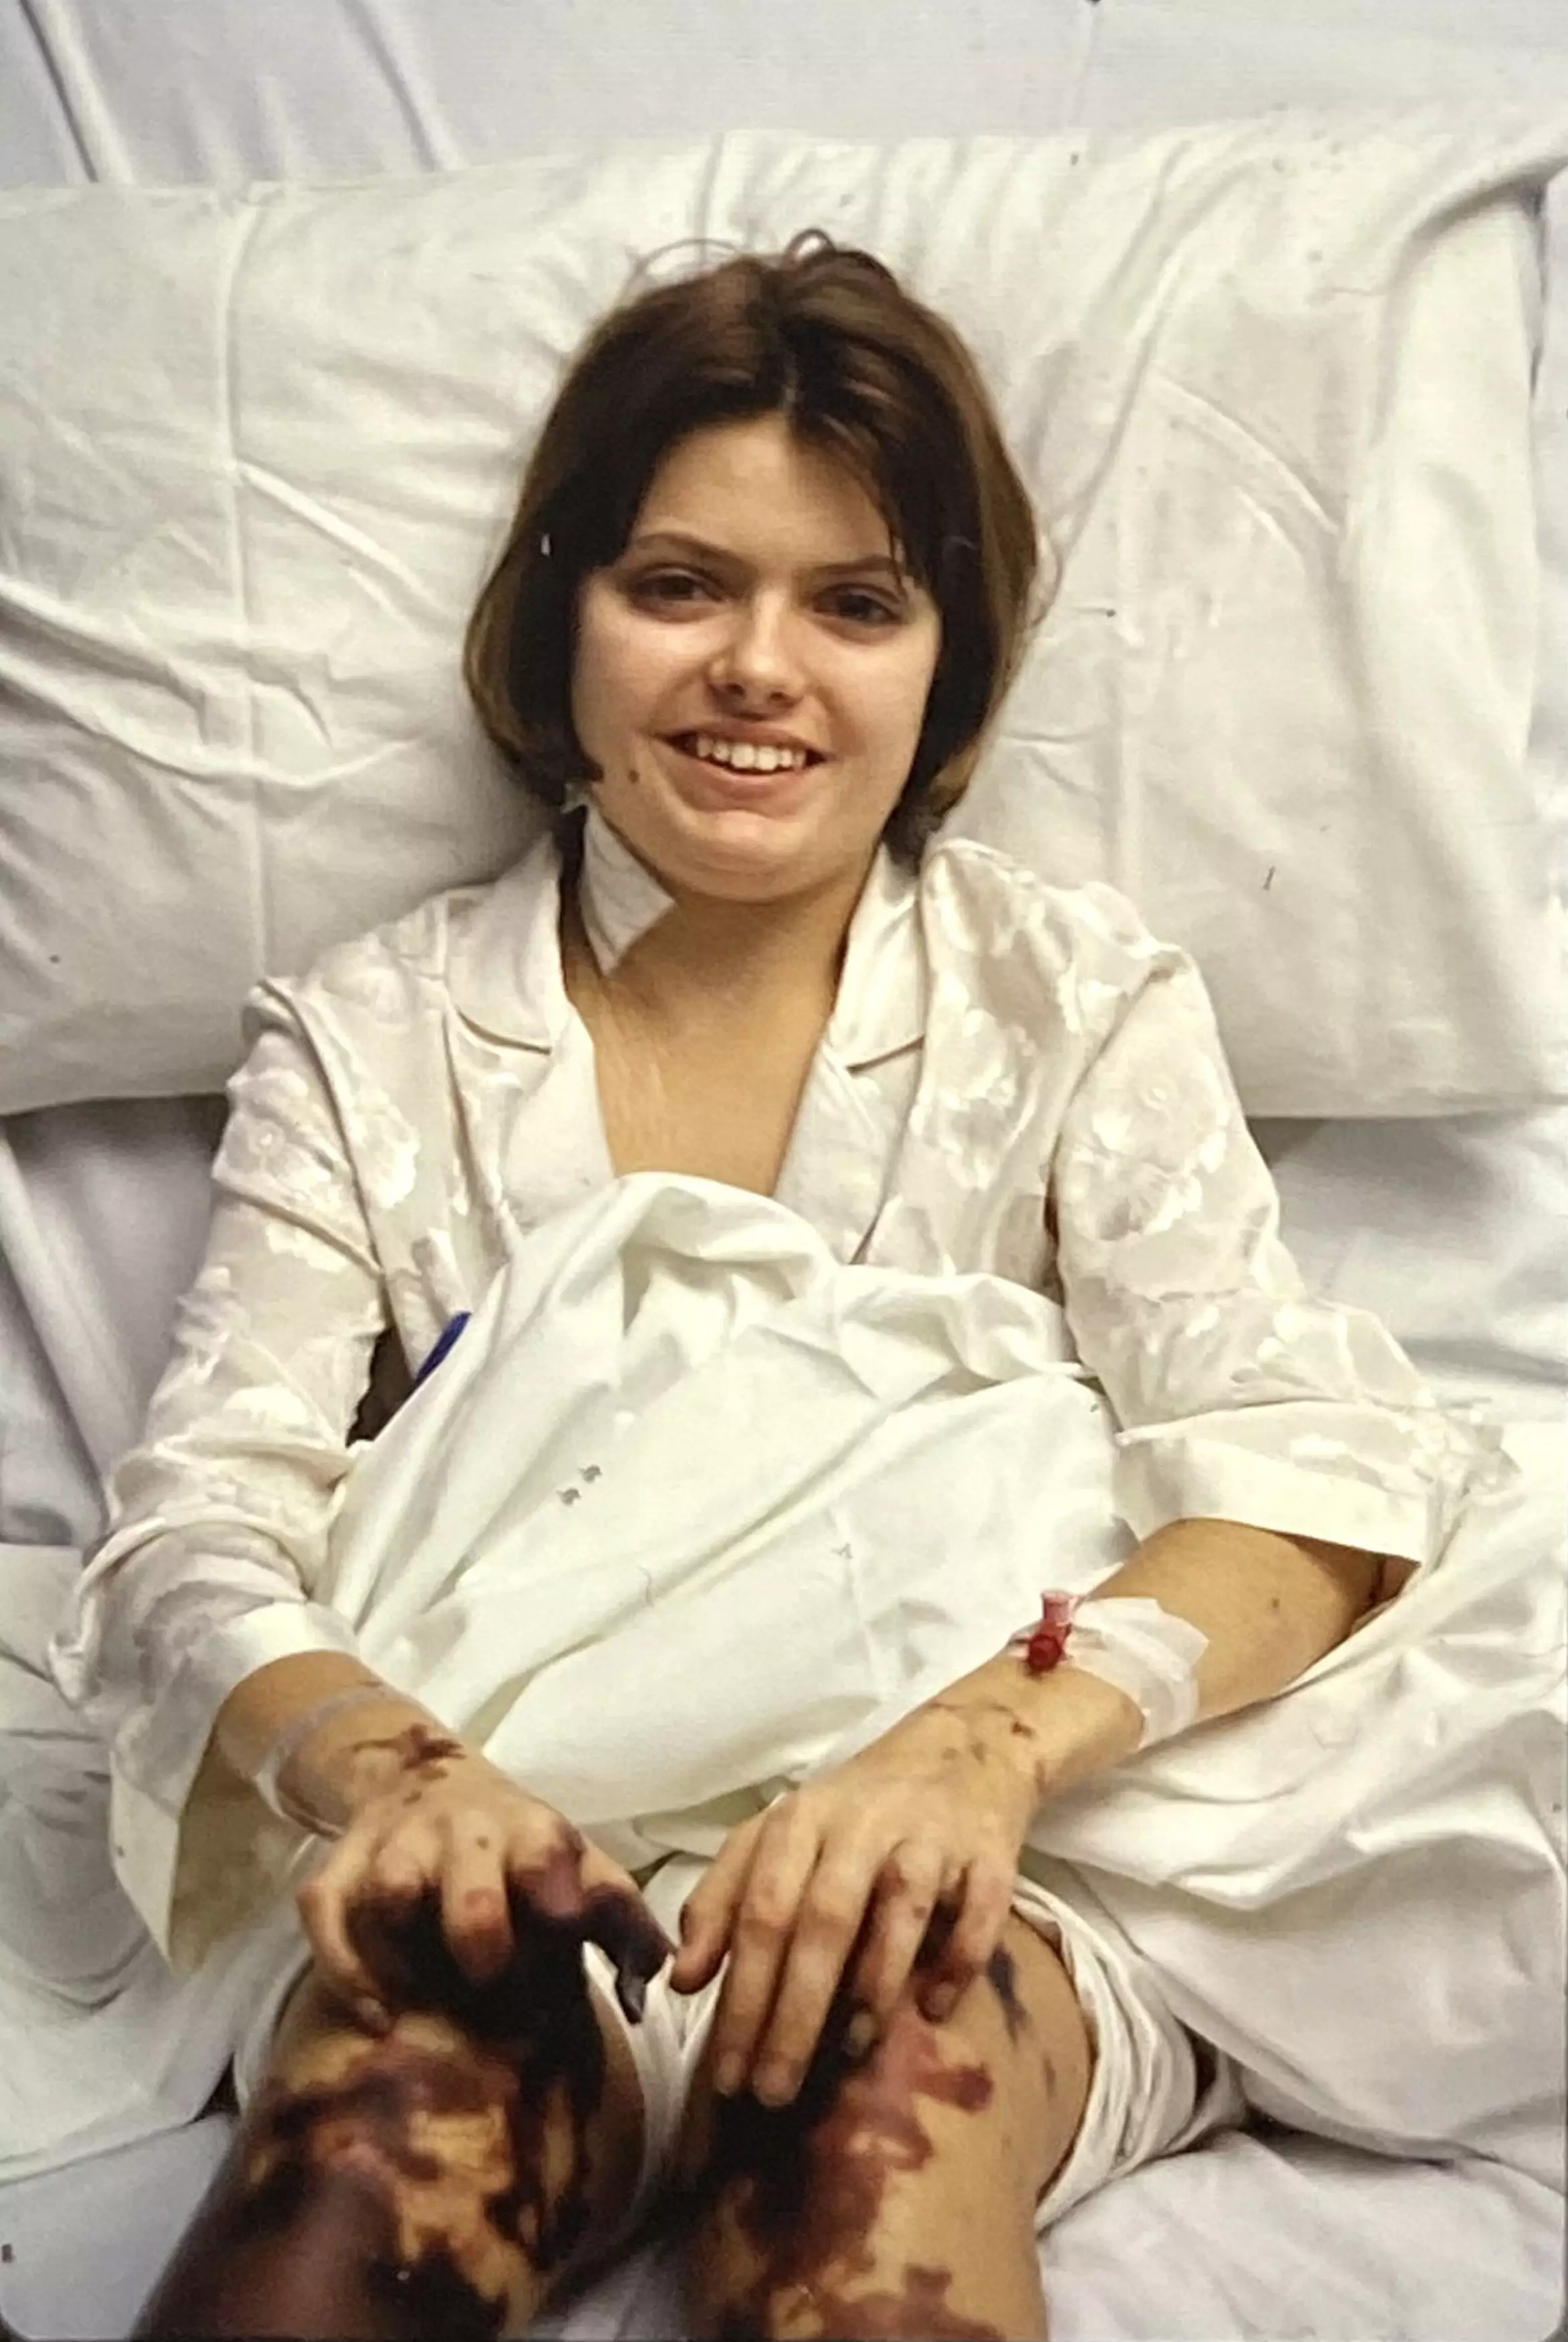 Another image shows Sophia in hospital before the amputation (